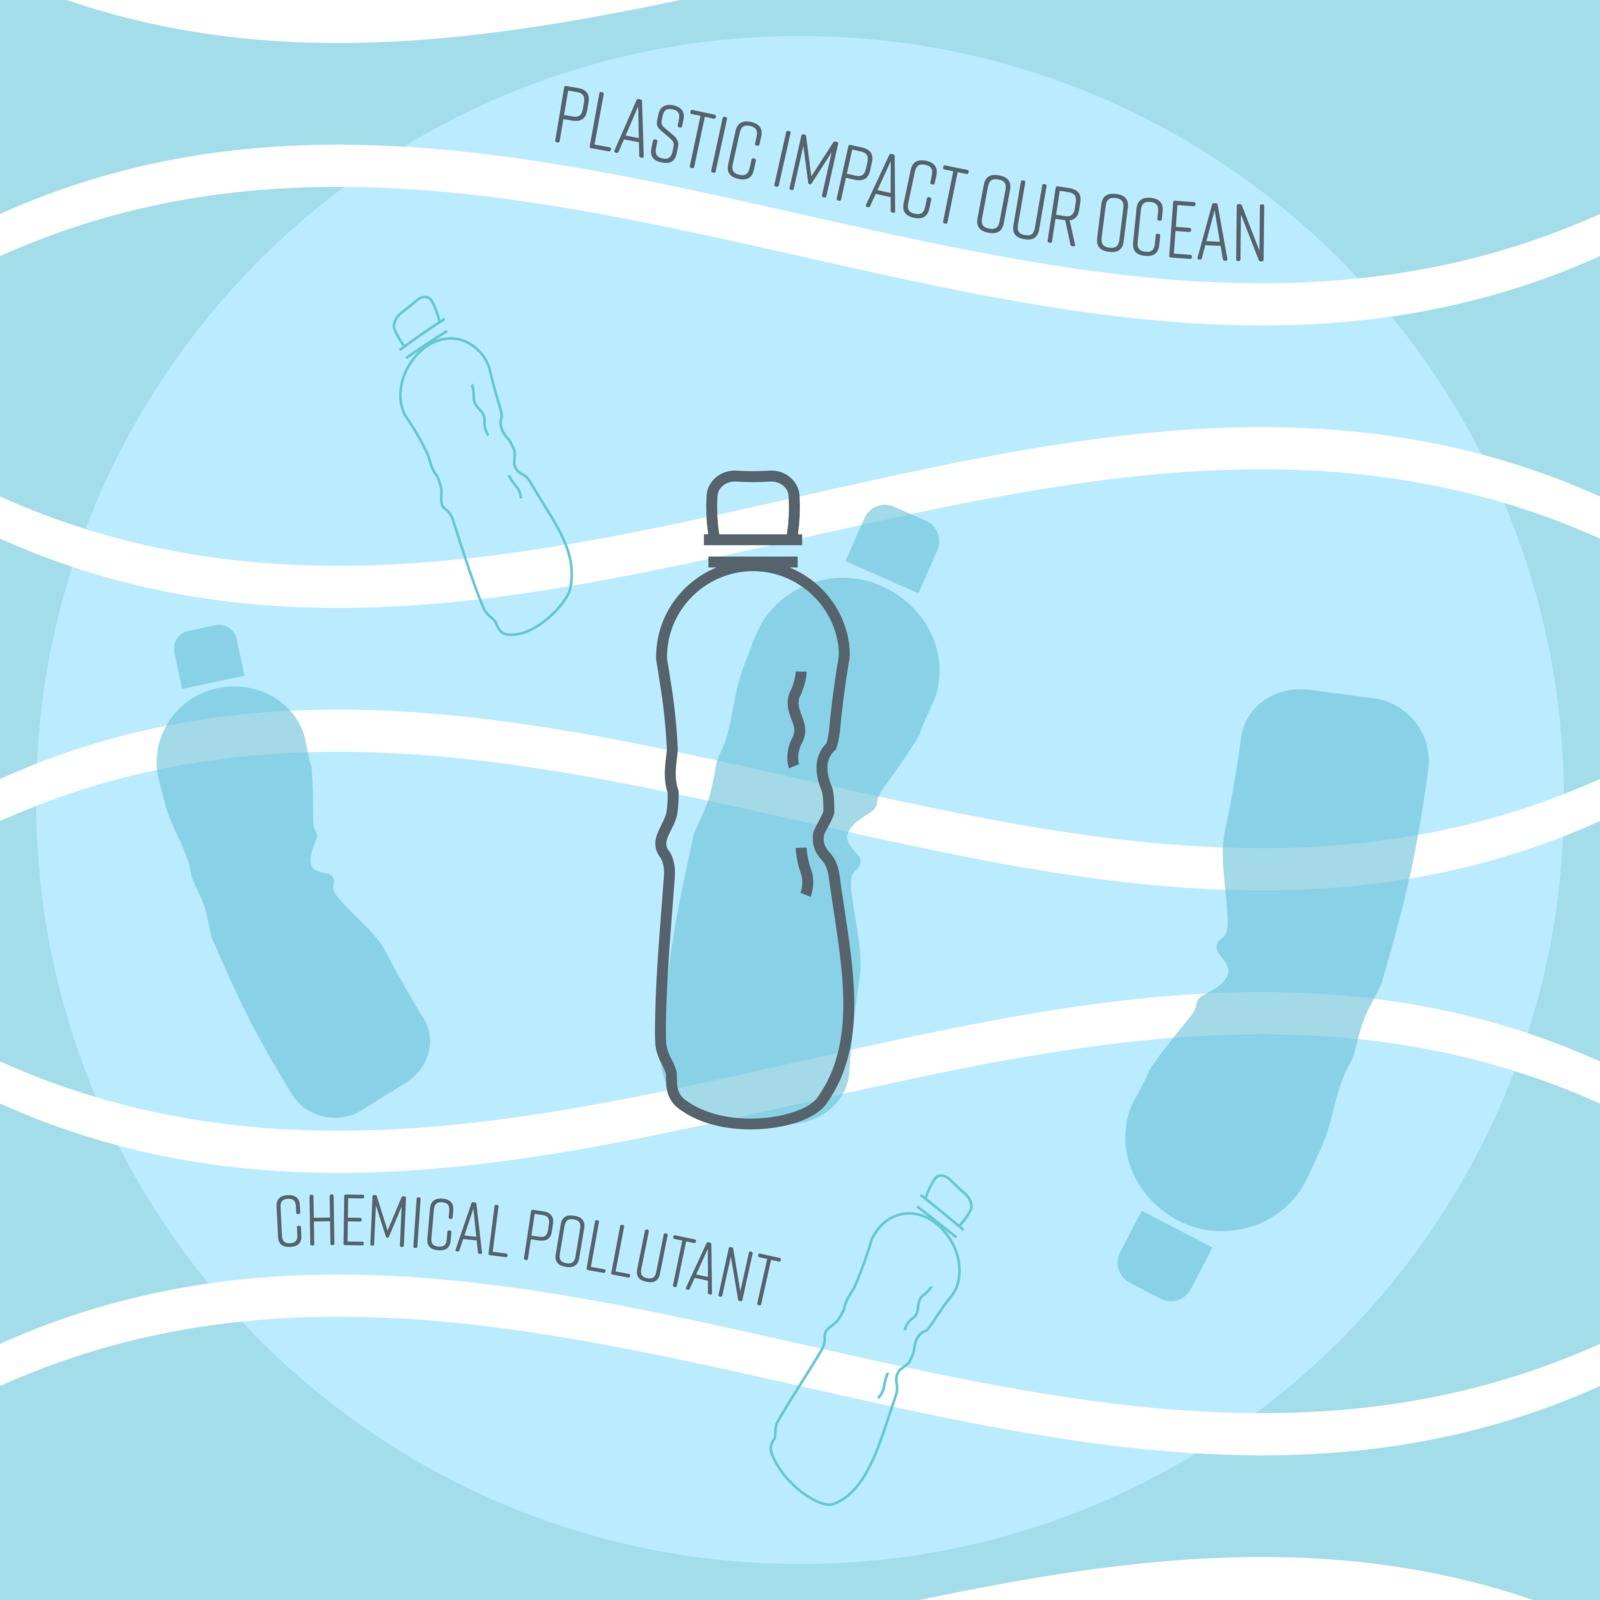 Transparent plastic bottle outline and silhouette icon float in the ocean, representing chemical pollutant spoil the ocean. Plastic impact our ocean concept. Vector illustration.